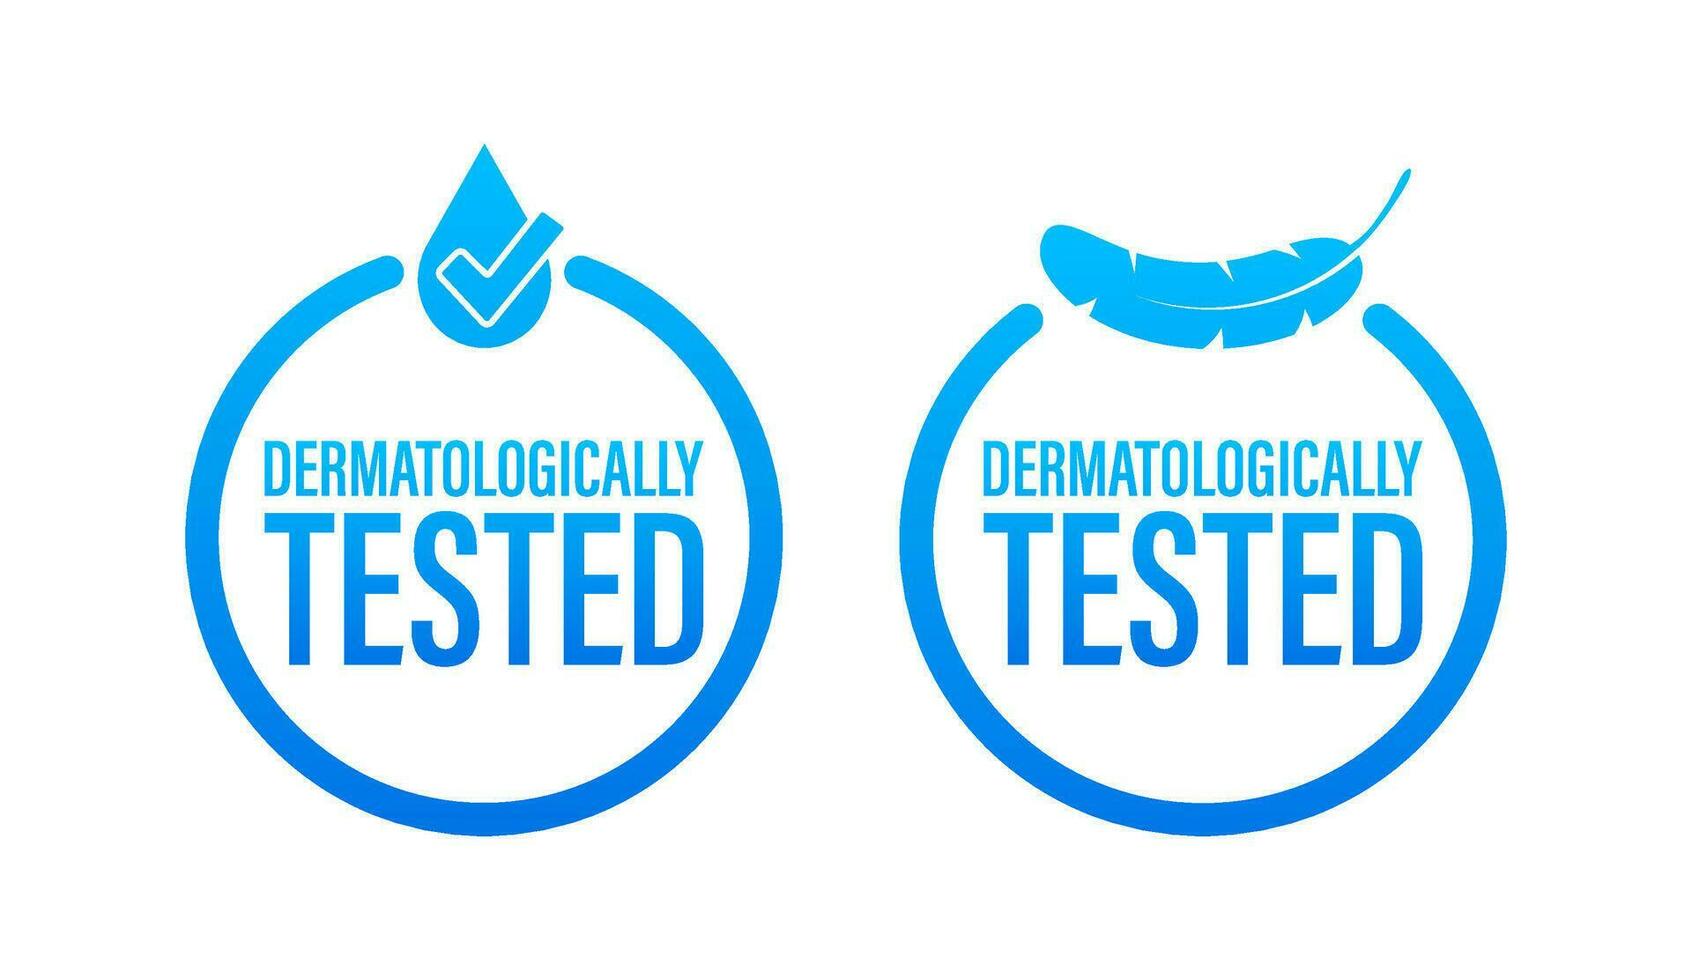 Dermatologically tested sign, label. Safe personal hygiene product. Vector stock illustration